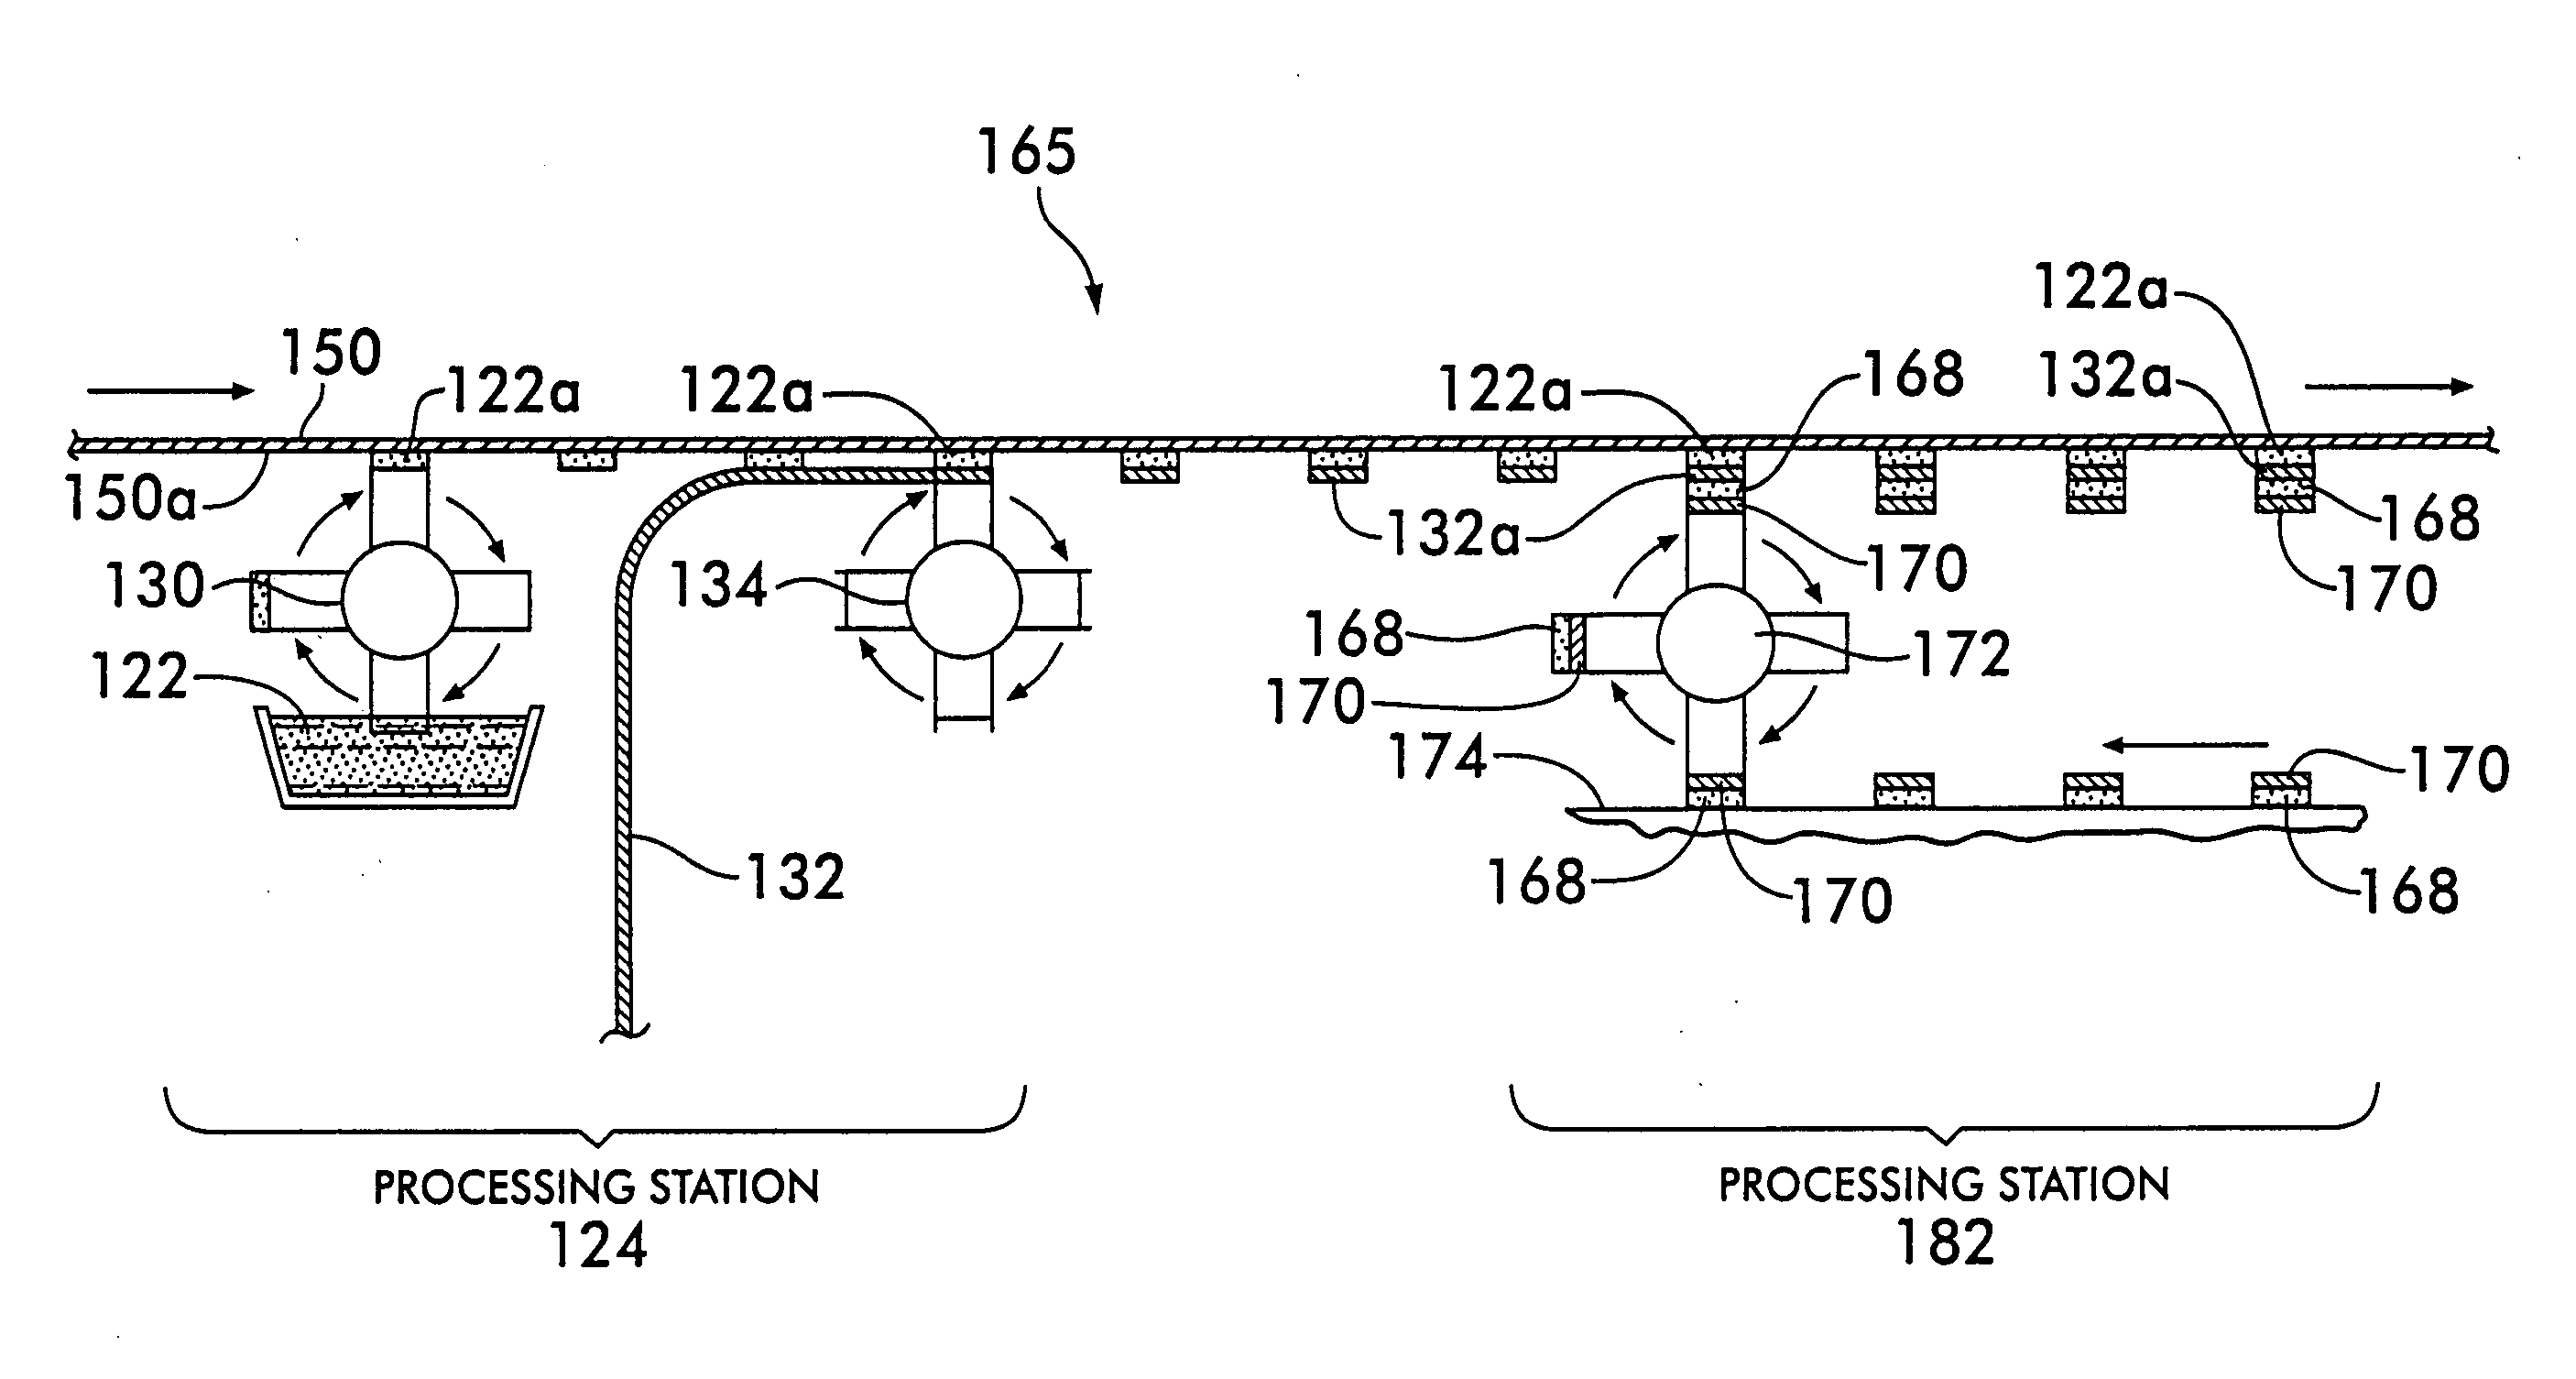 Tag having patterned circuit elements and a process for making same